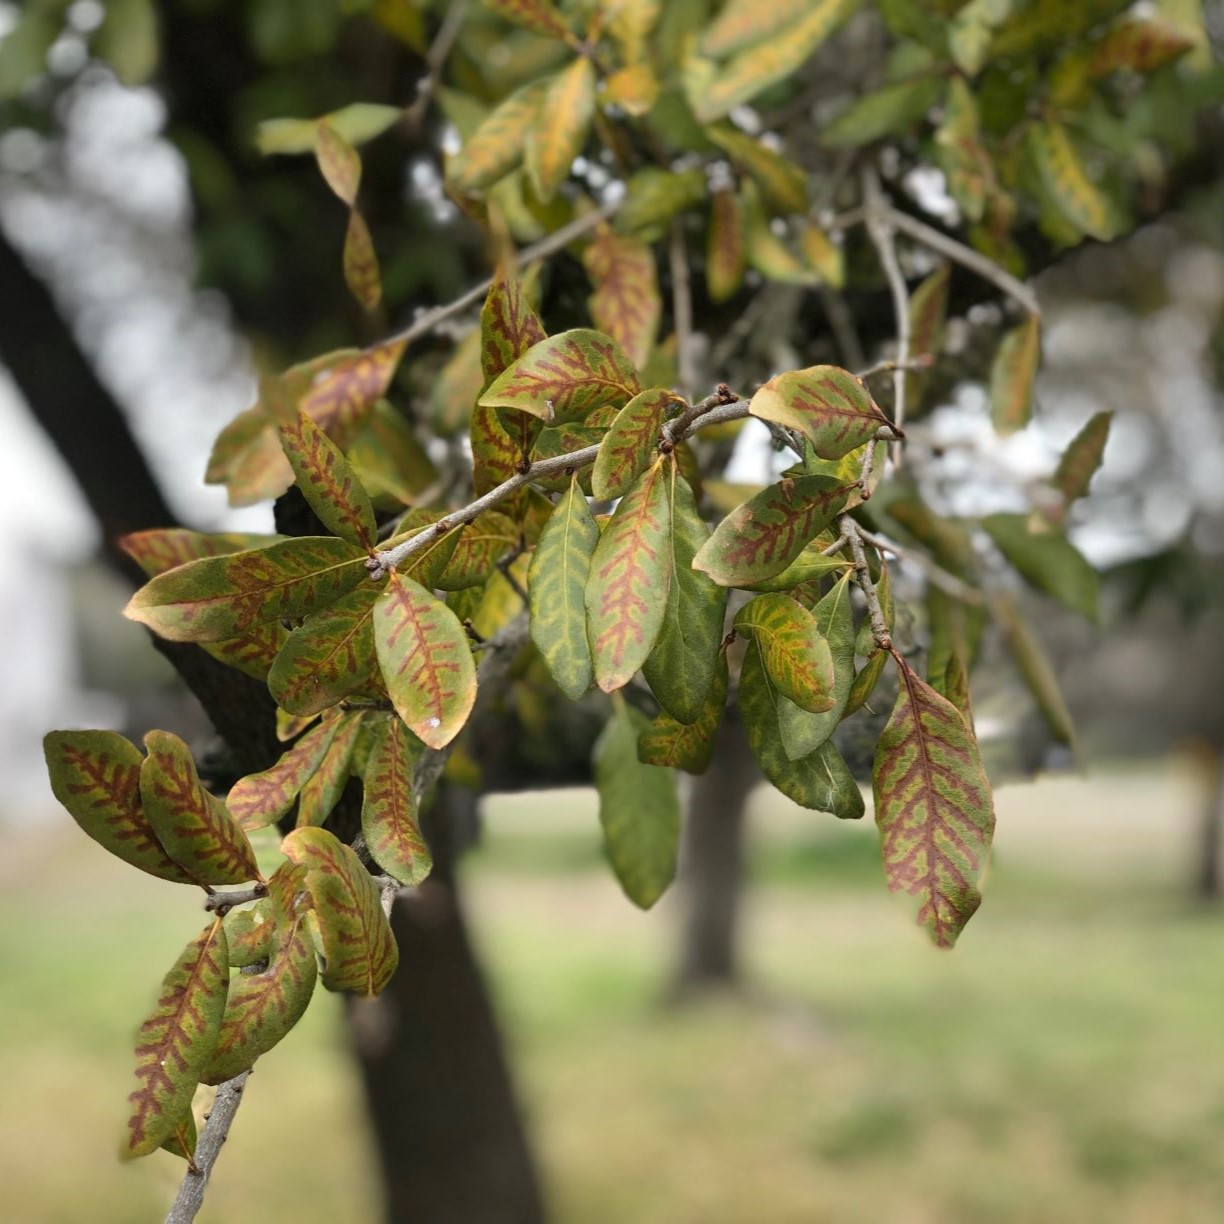 While winter is the ideal time to prune trees, pruning after recent droughts and freezes may cause more damage than good this year.